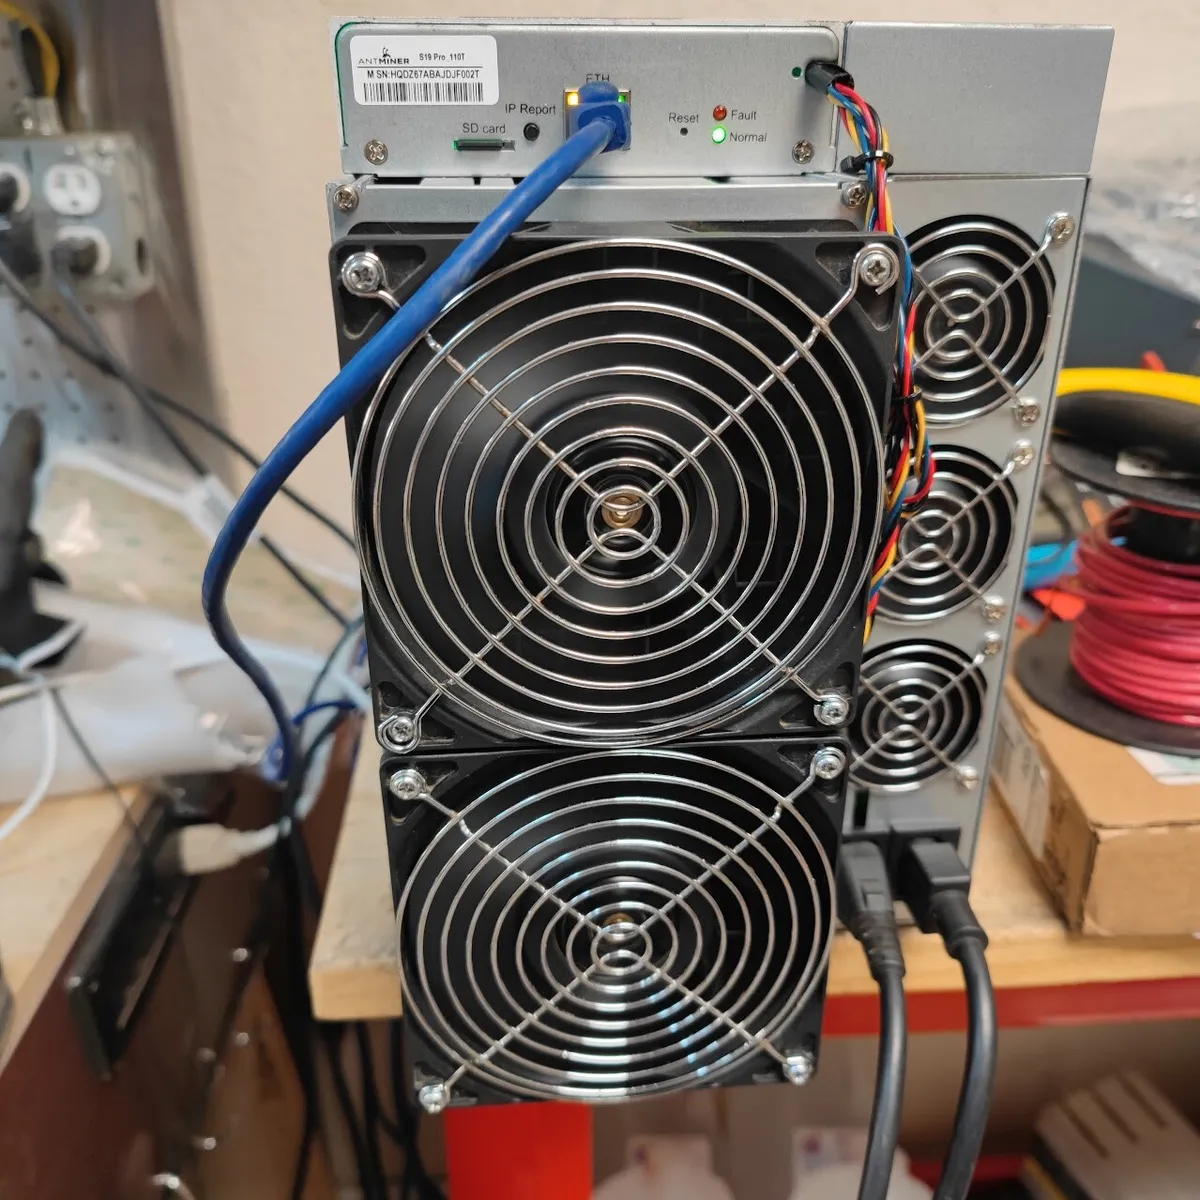 Best Buy of All-New Release of bitmain antminer s9 - cointime.fun